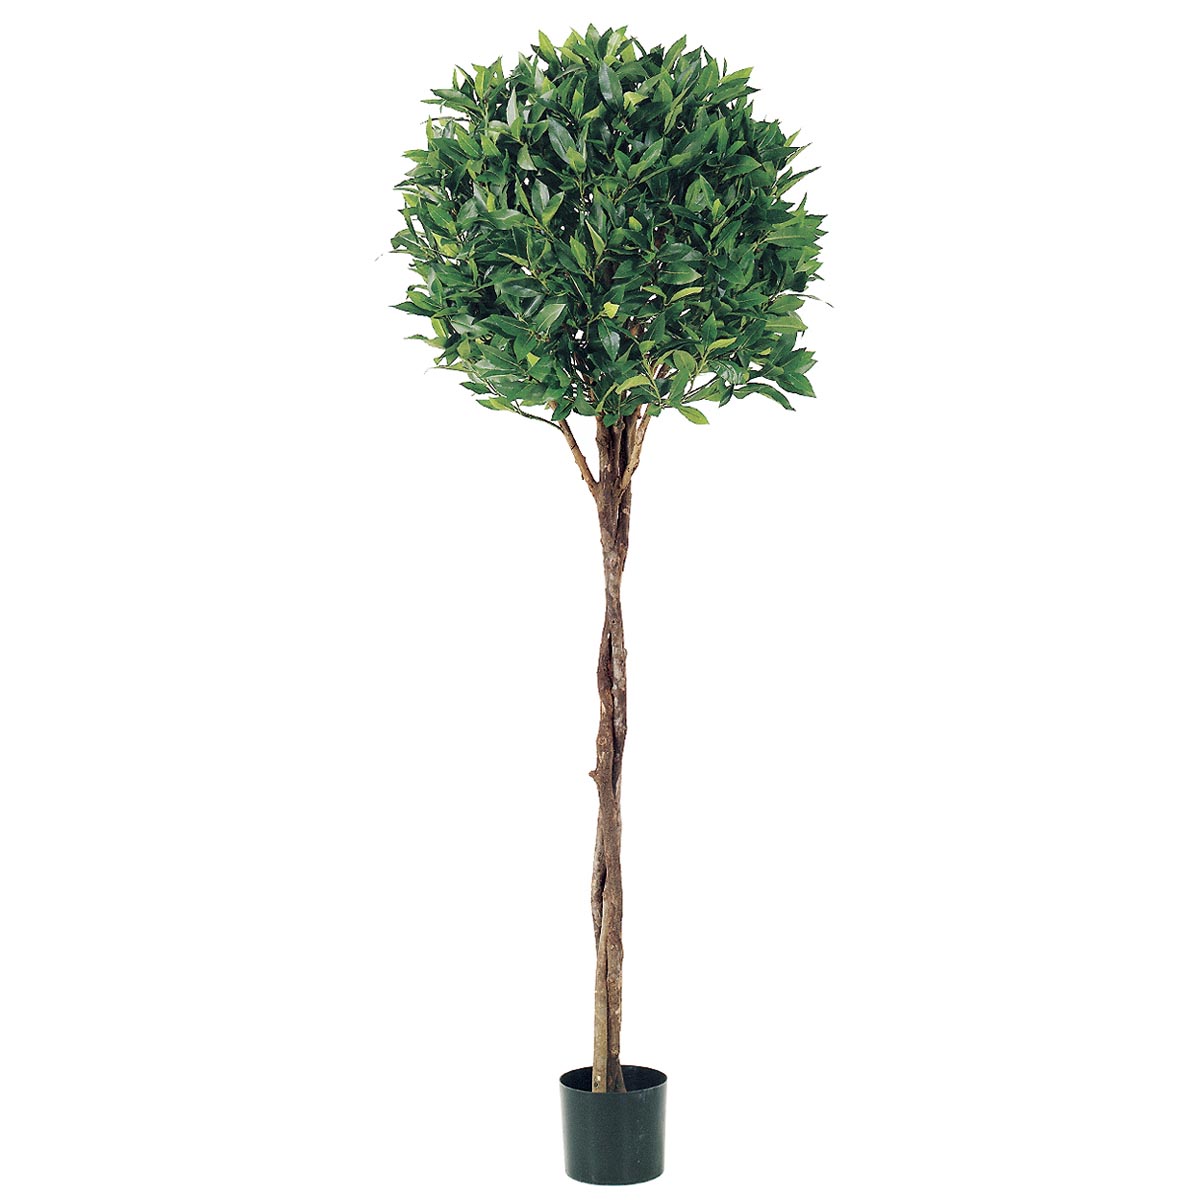 5 Foot Bay Leaf Topiary With Braided Trunk: Limited Uv (set Of 2)